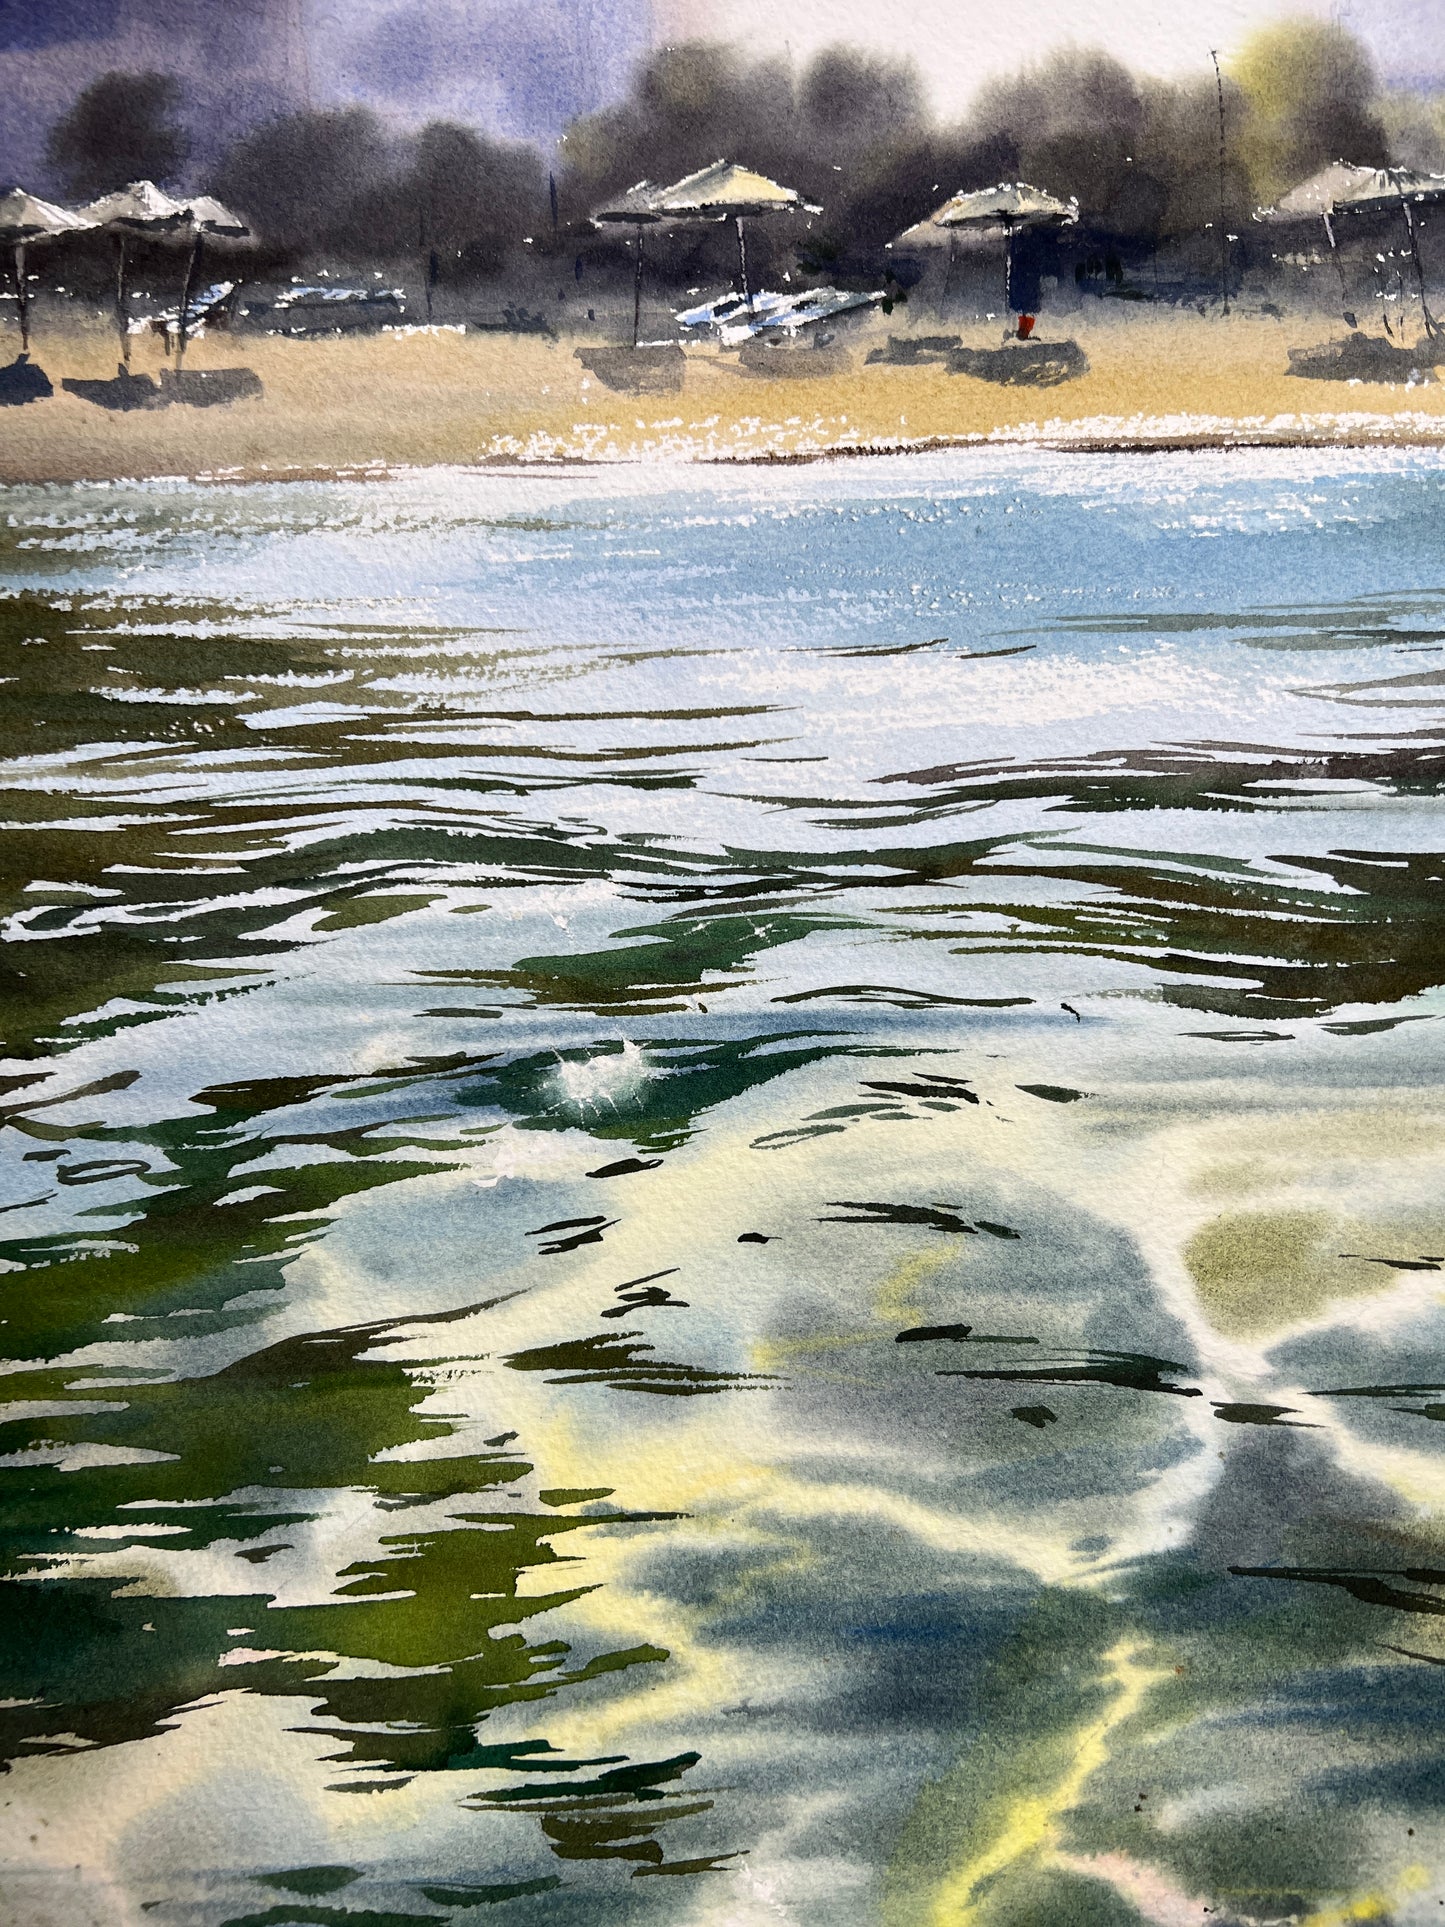 "Beach on the sea coast" Coastal Painting - Hand-Painted Watercolor, Reflective Seascape - 15x20 in